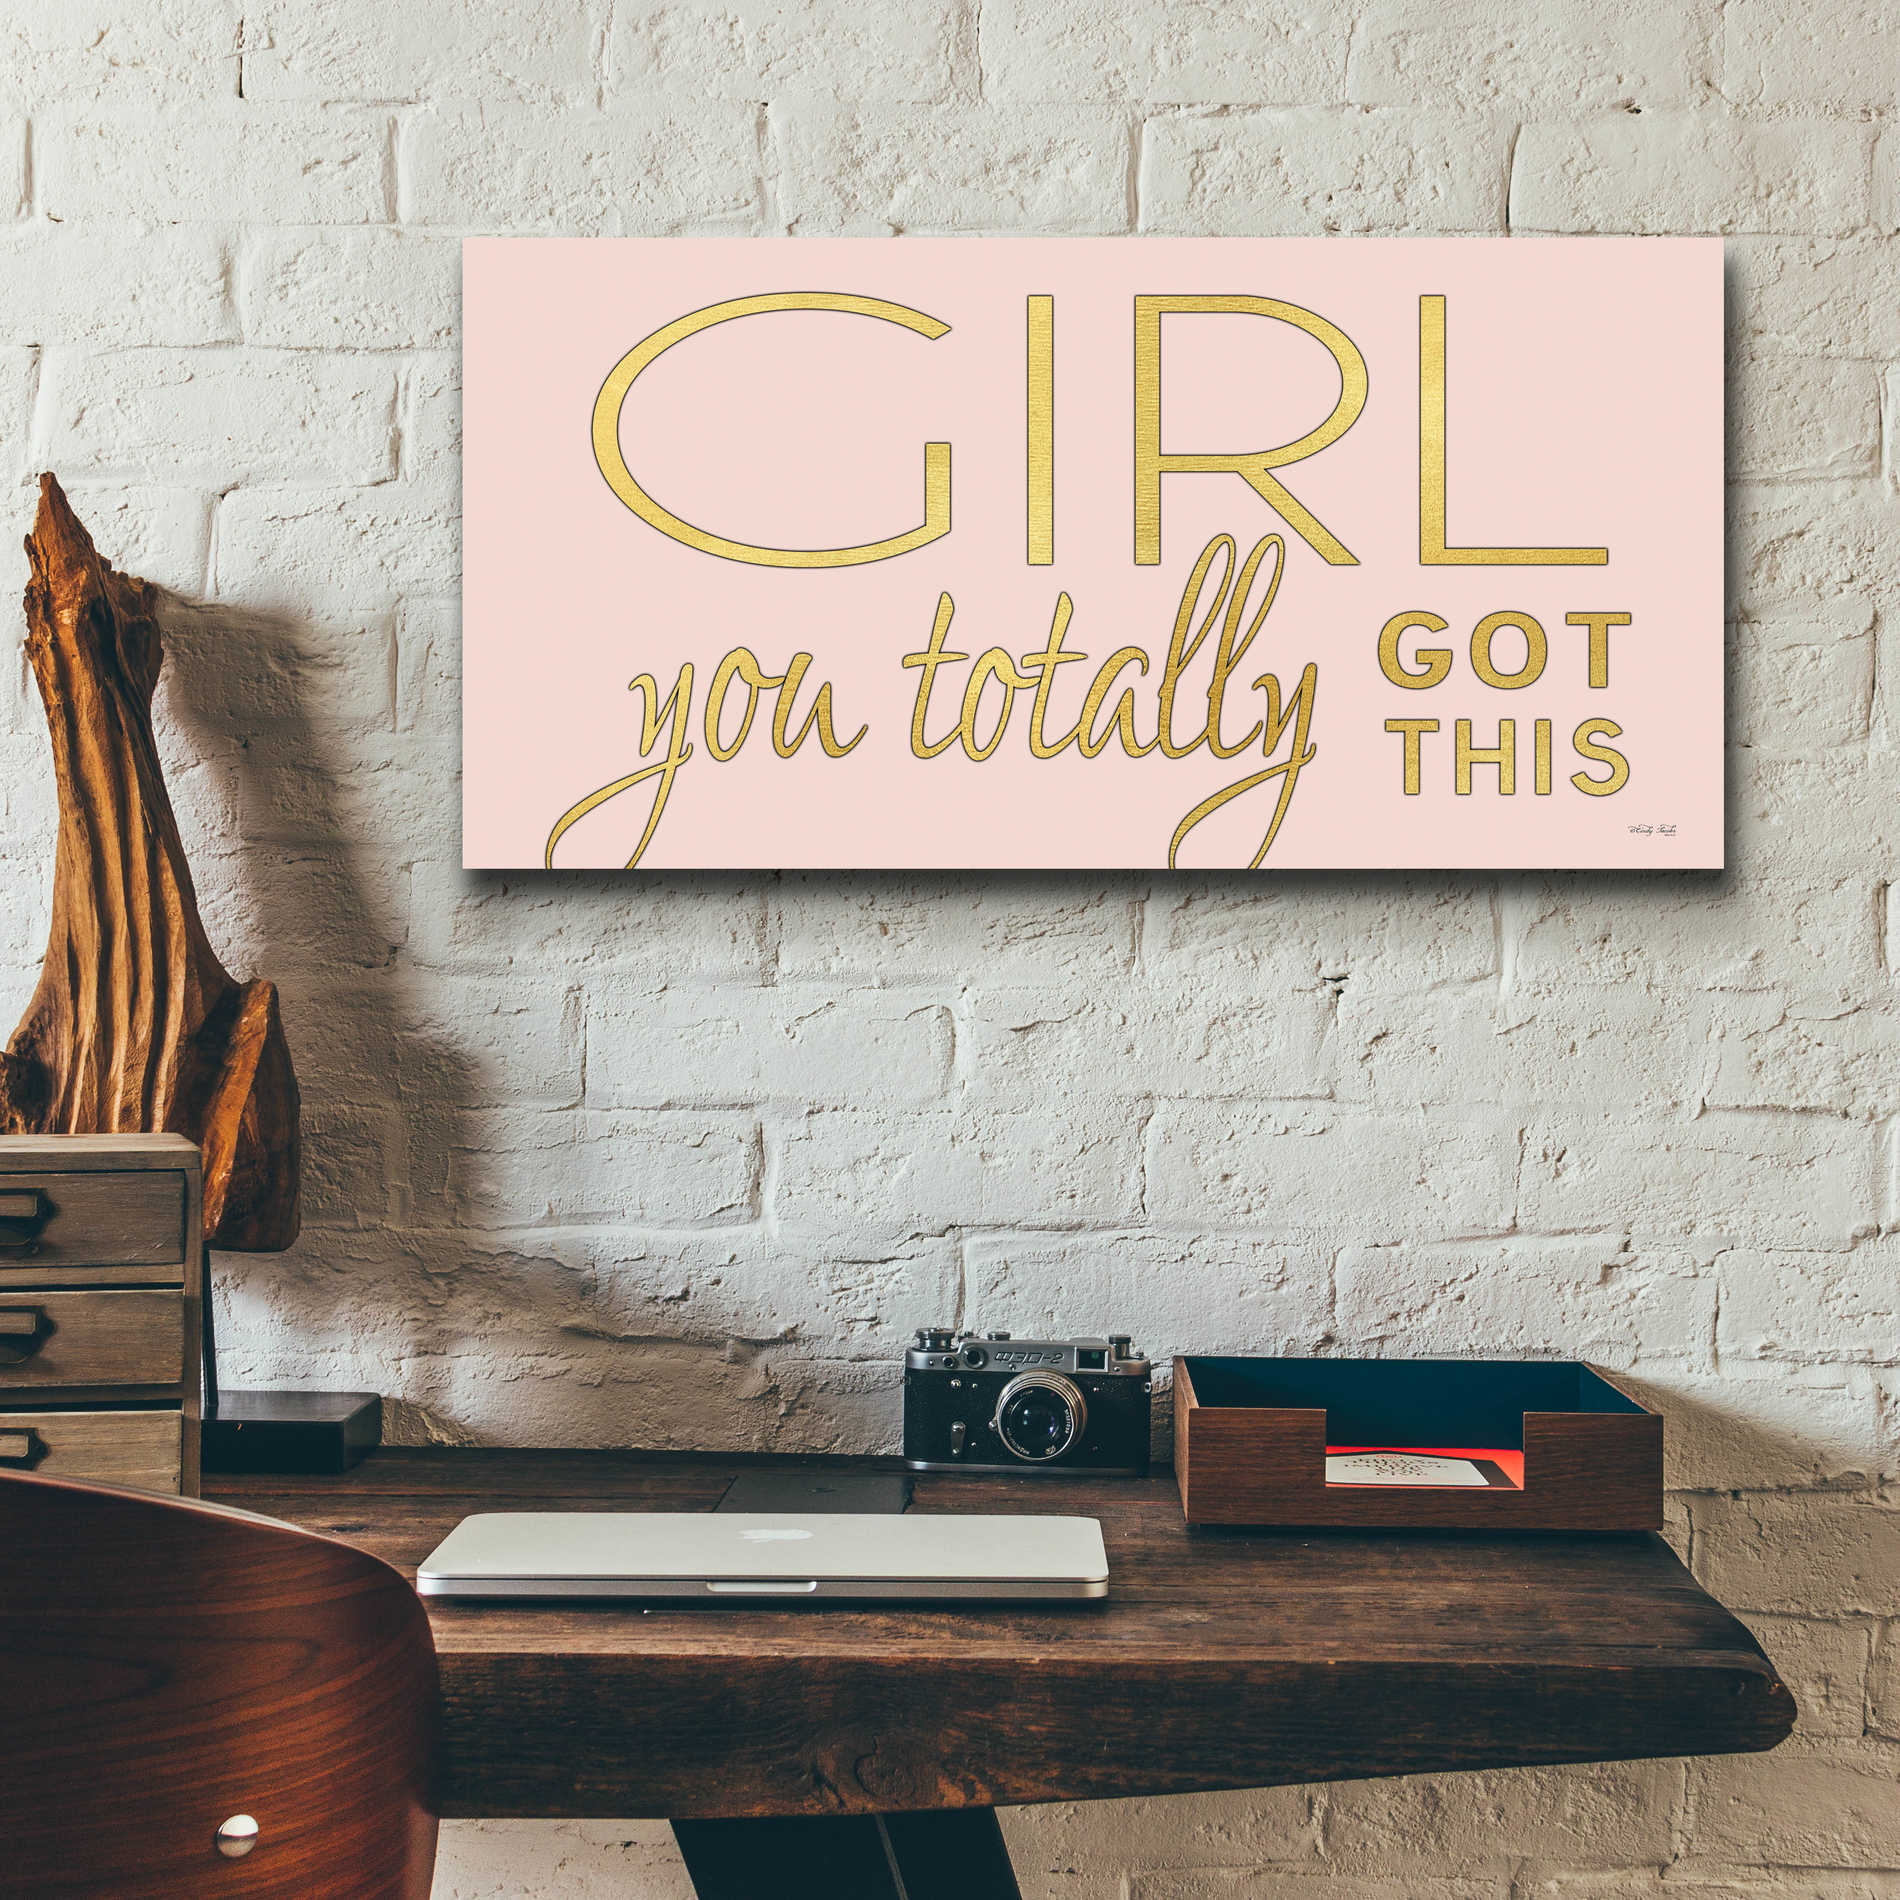 Epic Art 'Girl You Totally Got This' by Cindy Jacobs, Acrylic Glass Wall Art,24x12